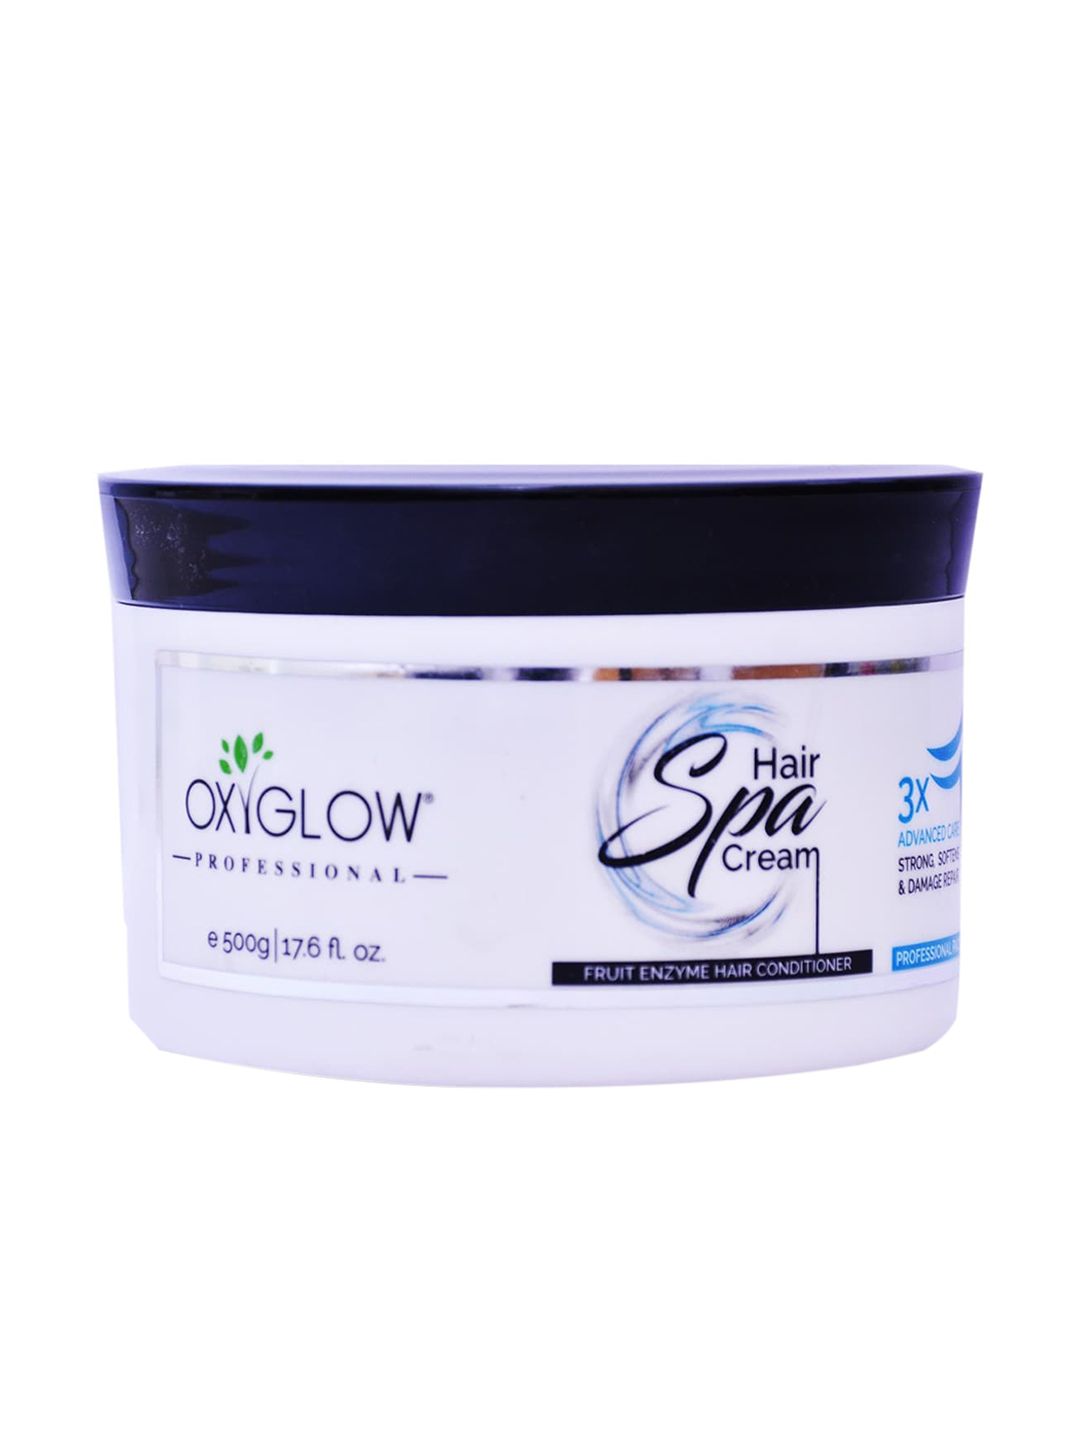 Oxyglow Hair Spa Cream with Fruit Enzymes - 500g Price in India